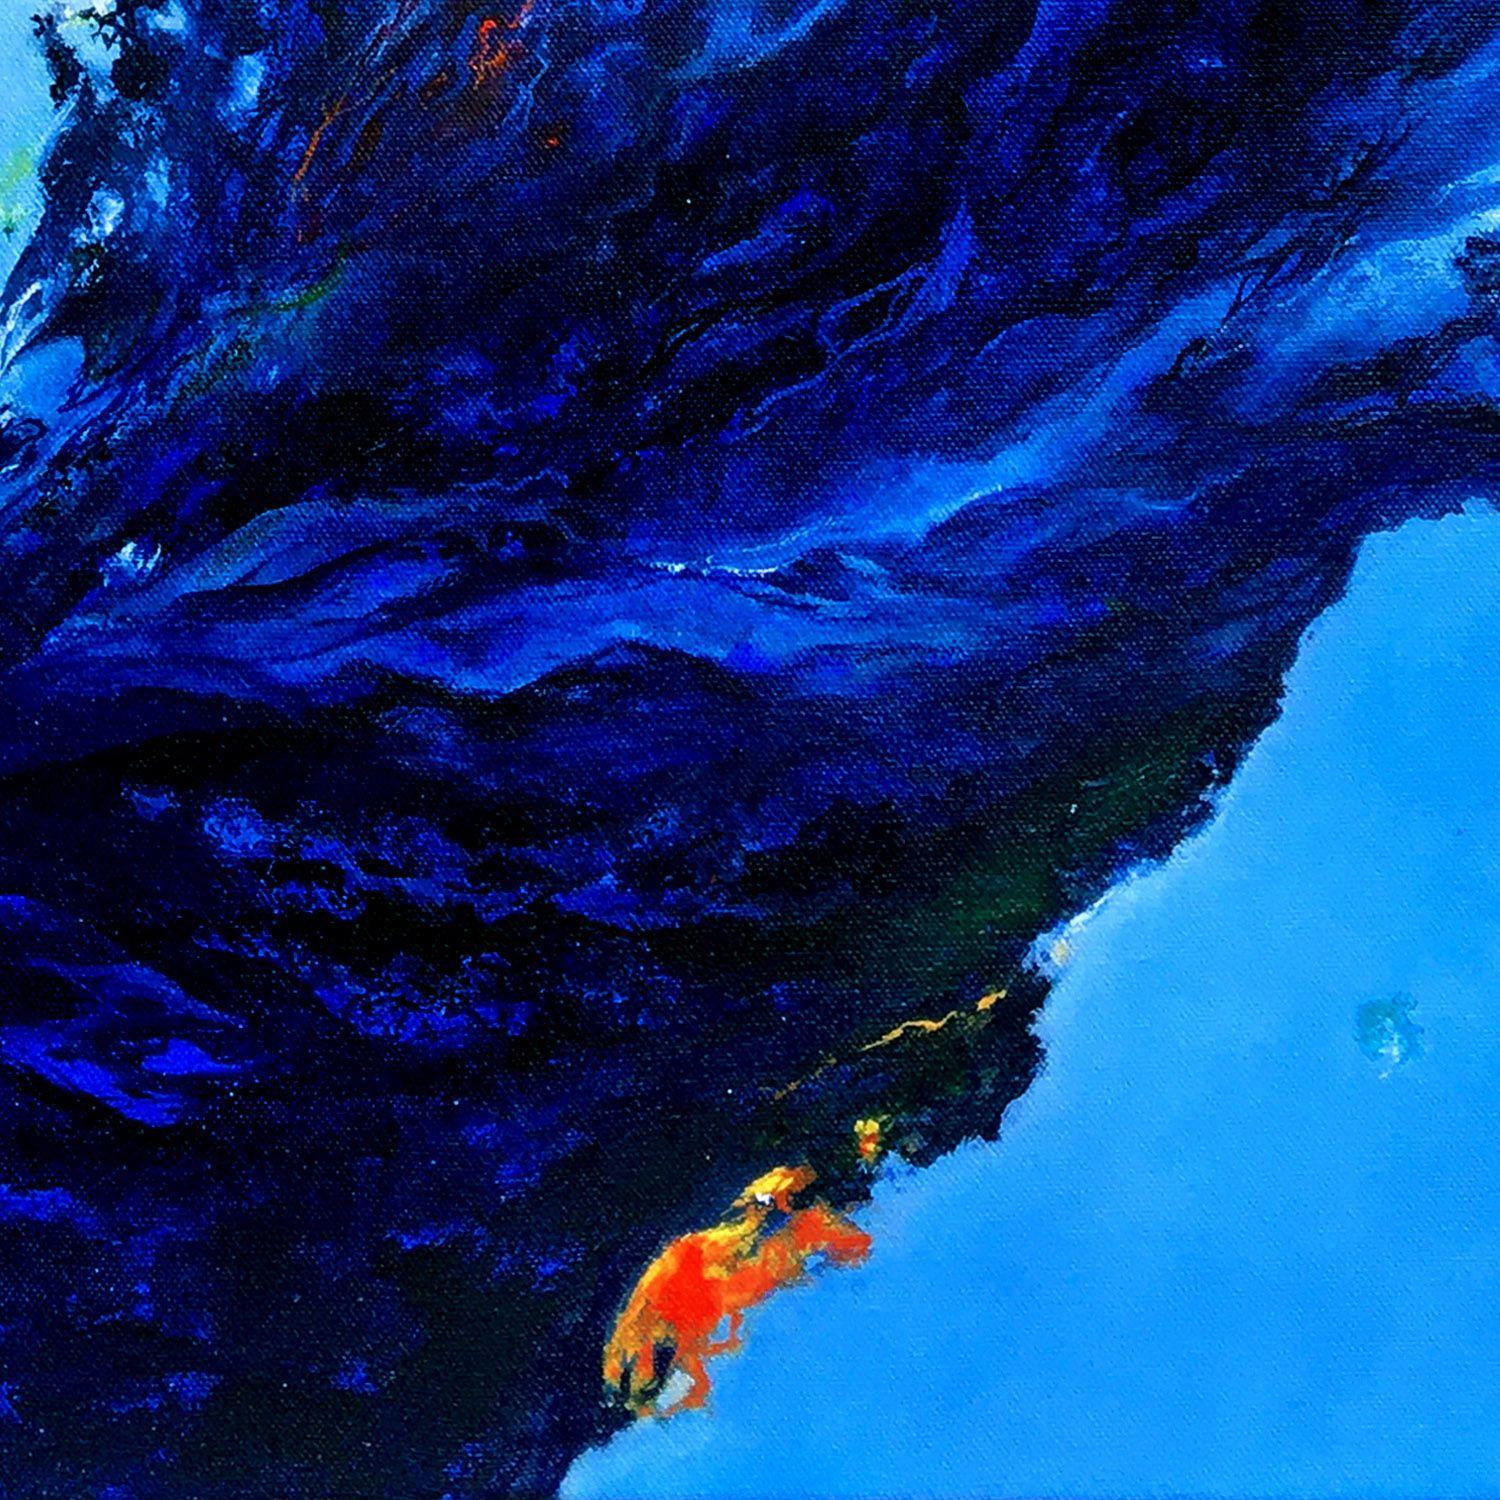 Eclosion, Painting, Oil on Canvas - Blue Abstract Painting by Theophile DELAINE